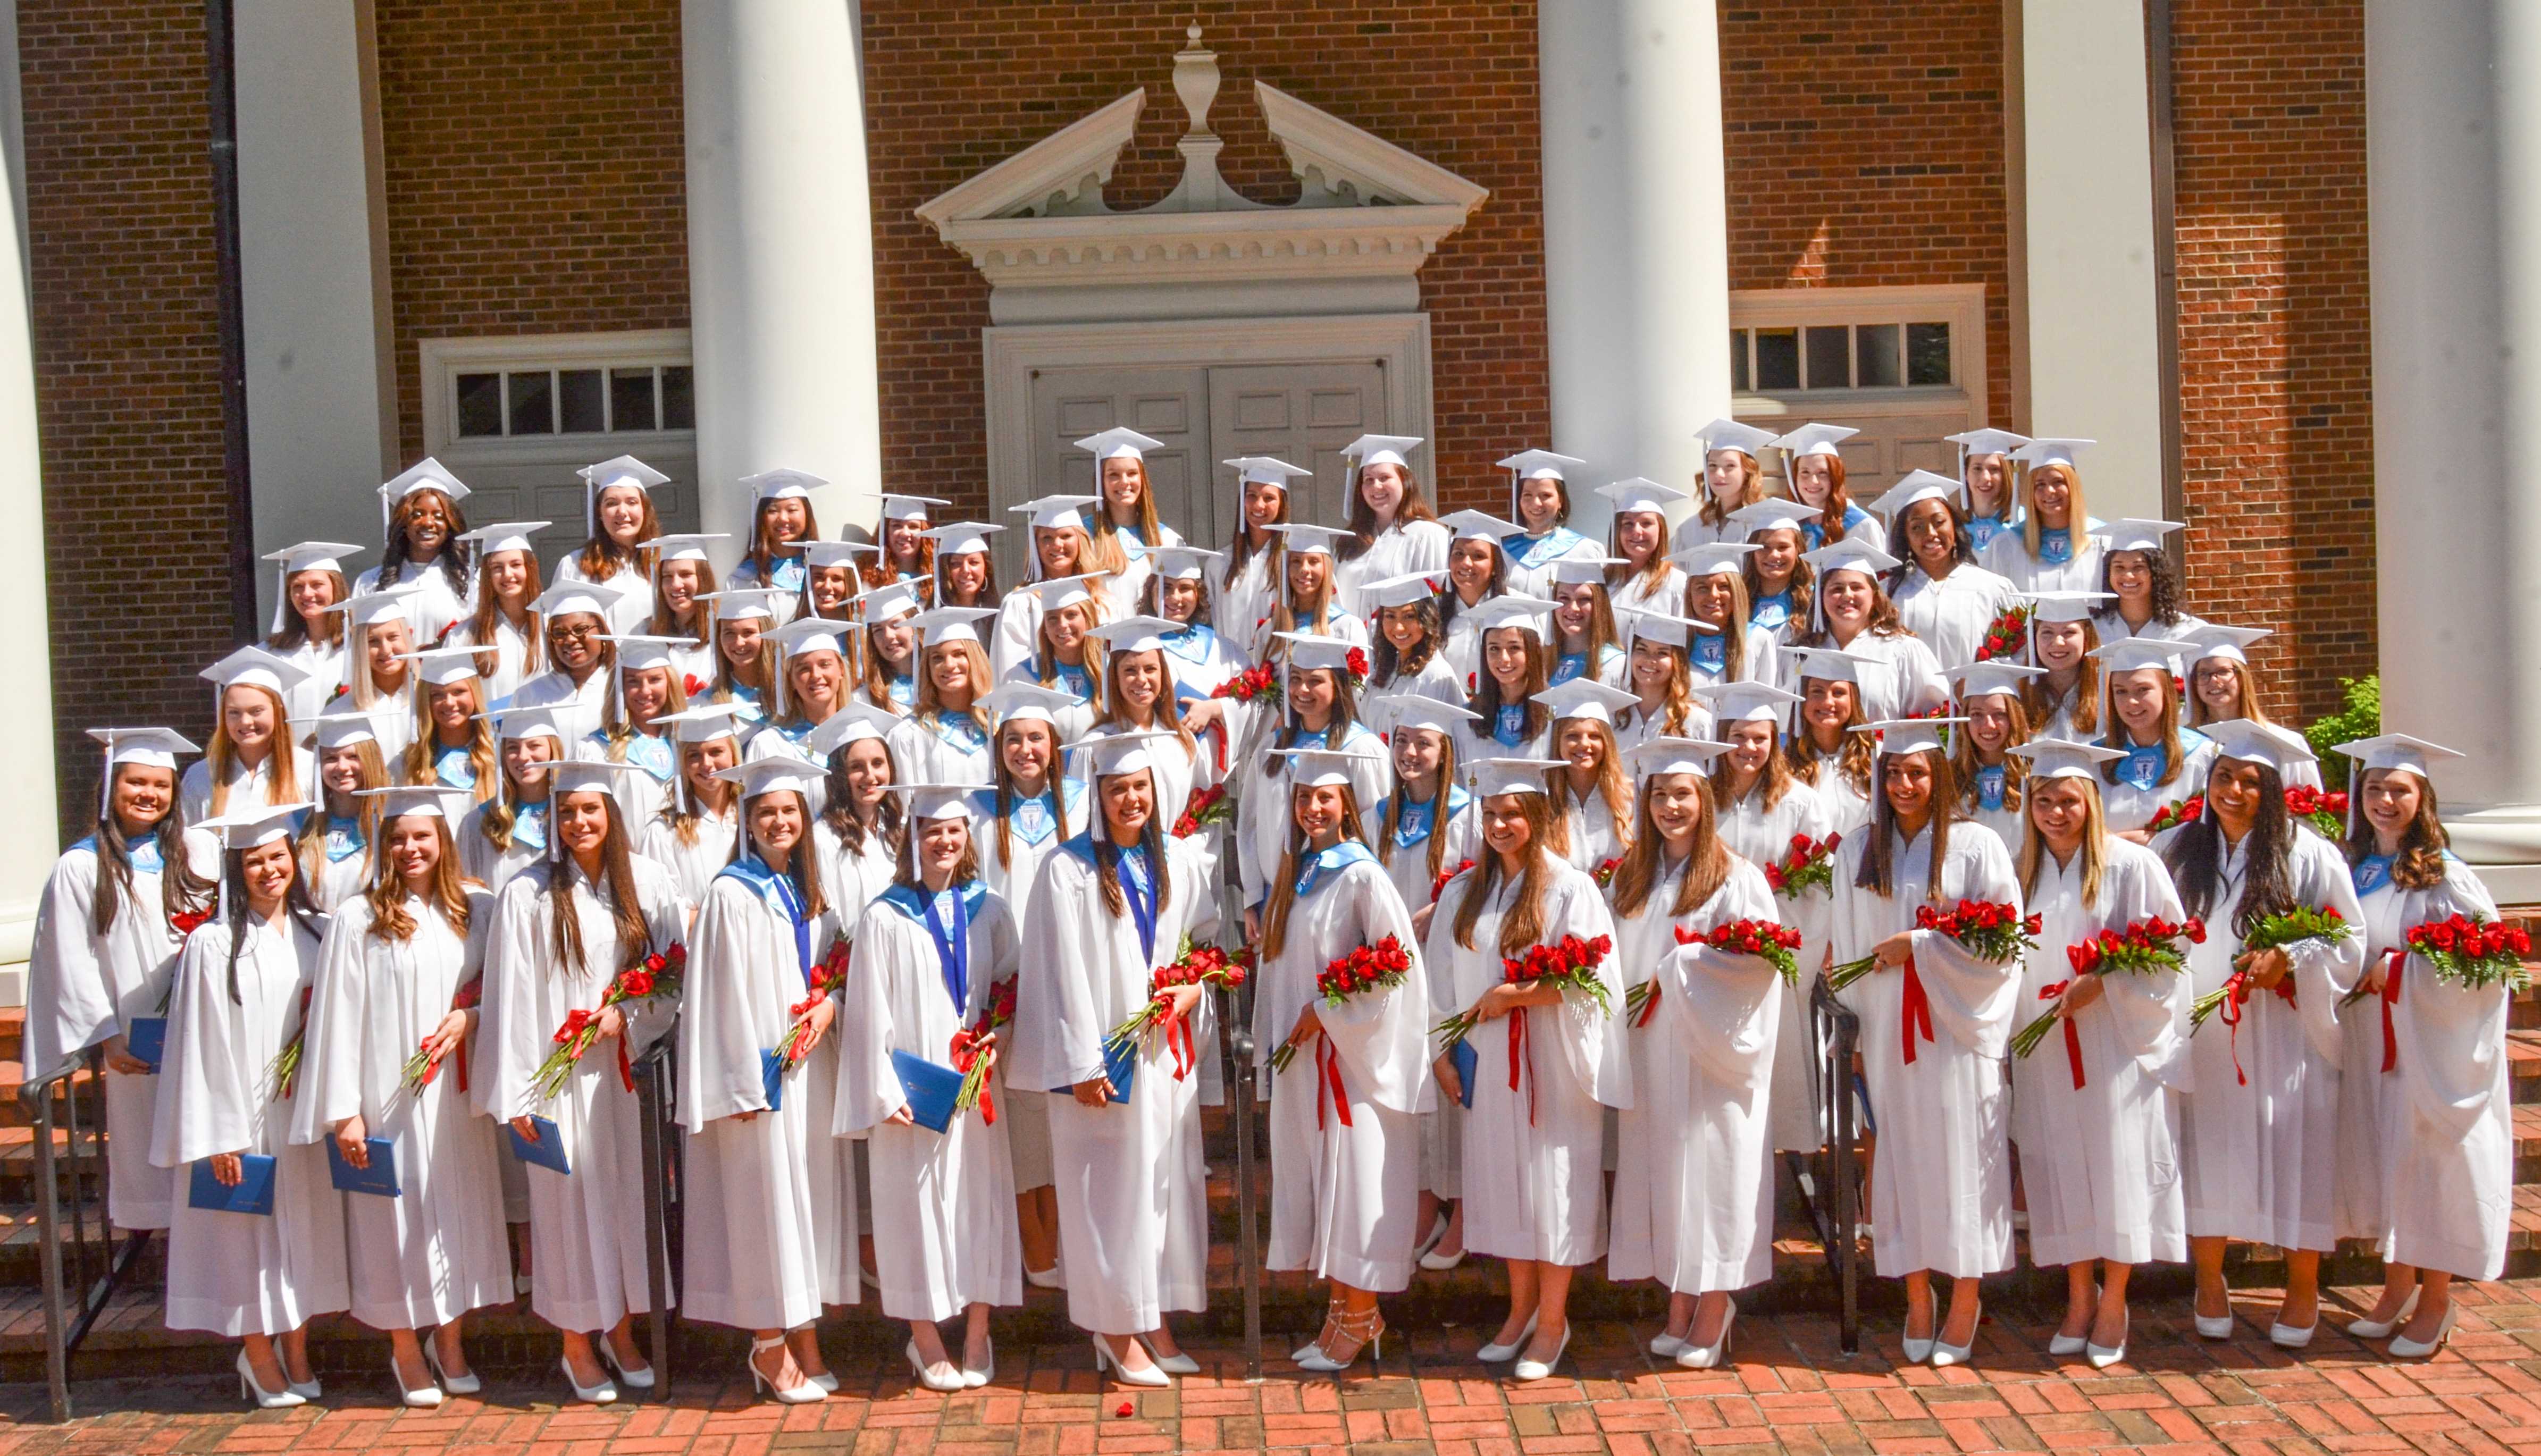 St. Agnes Academy Holds 168th Commencement Ceremony